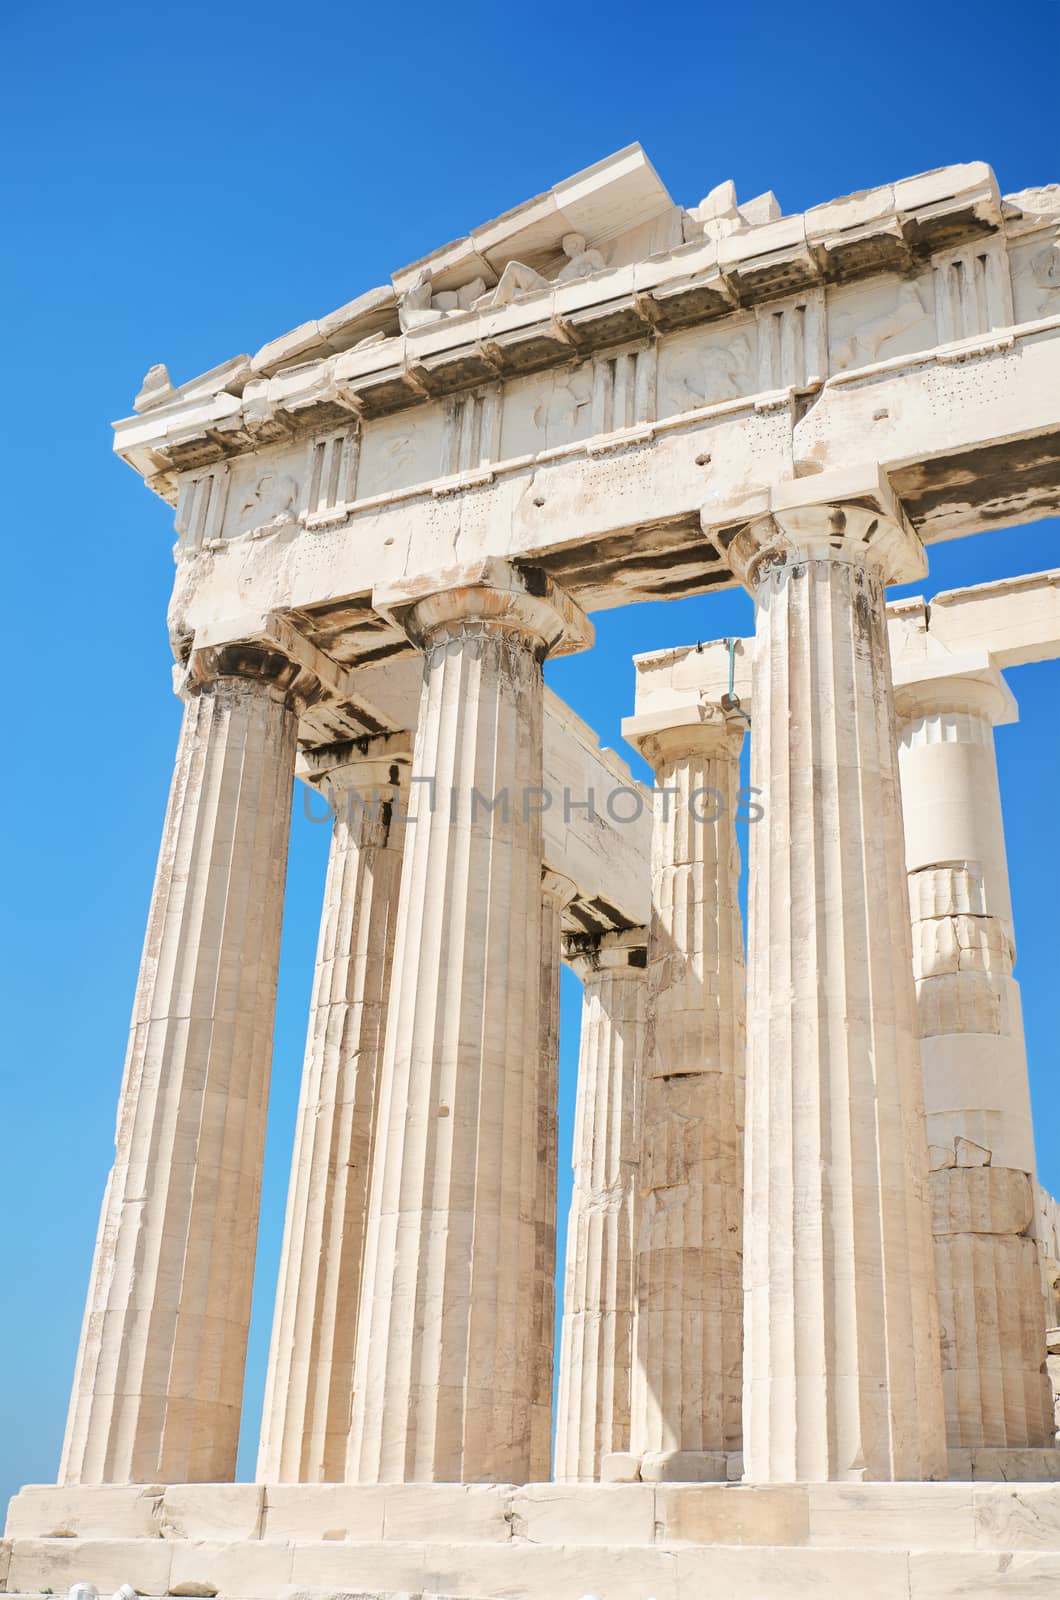 Detail of the columns in the famous Parthenon temple in the Acropolis, Athens, Greece. by HERRAEZ